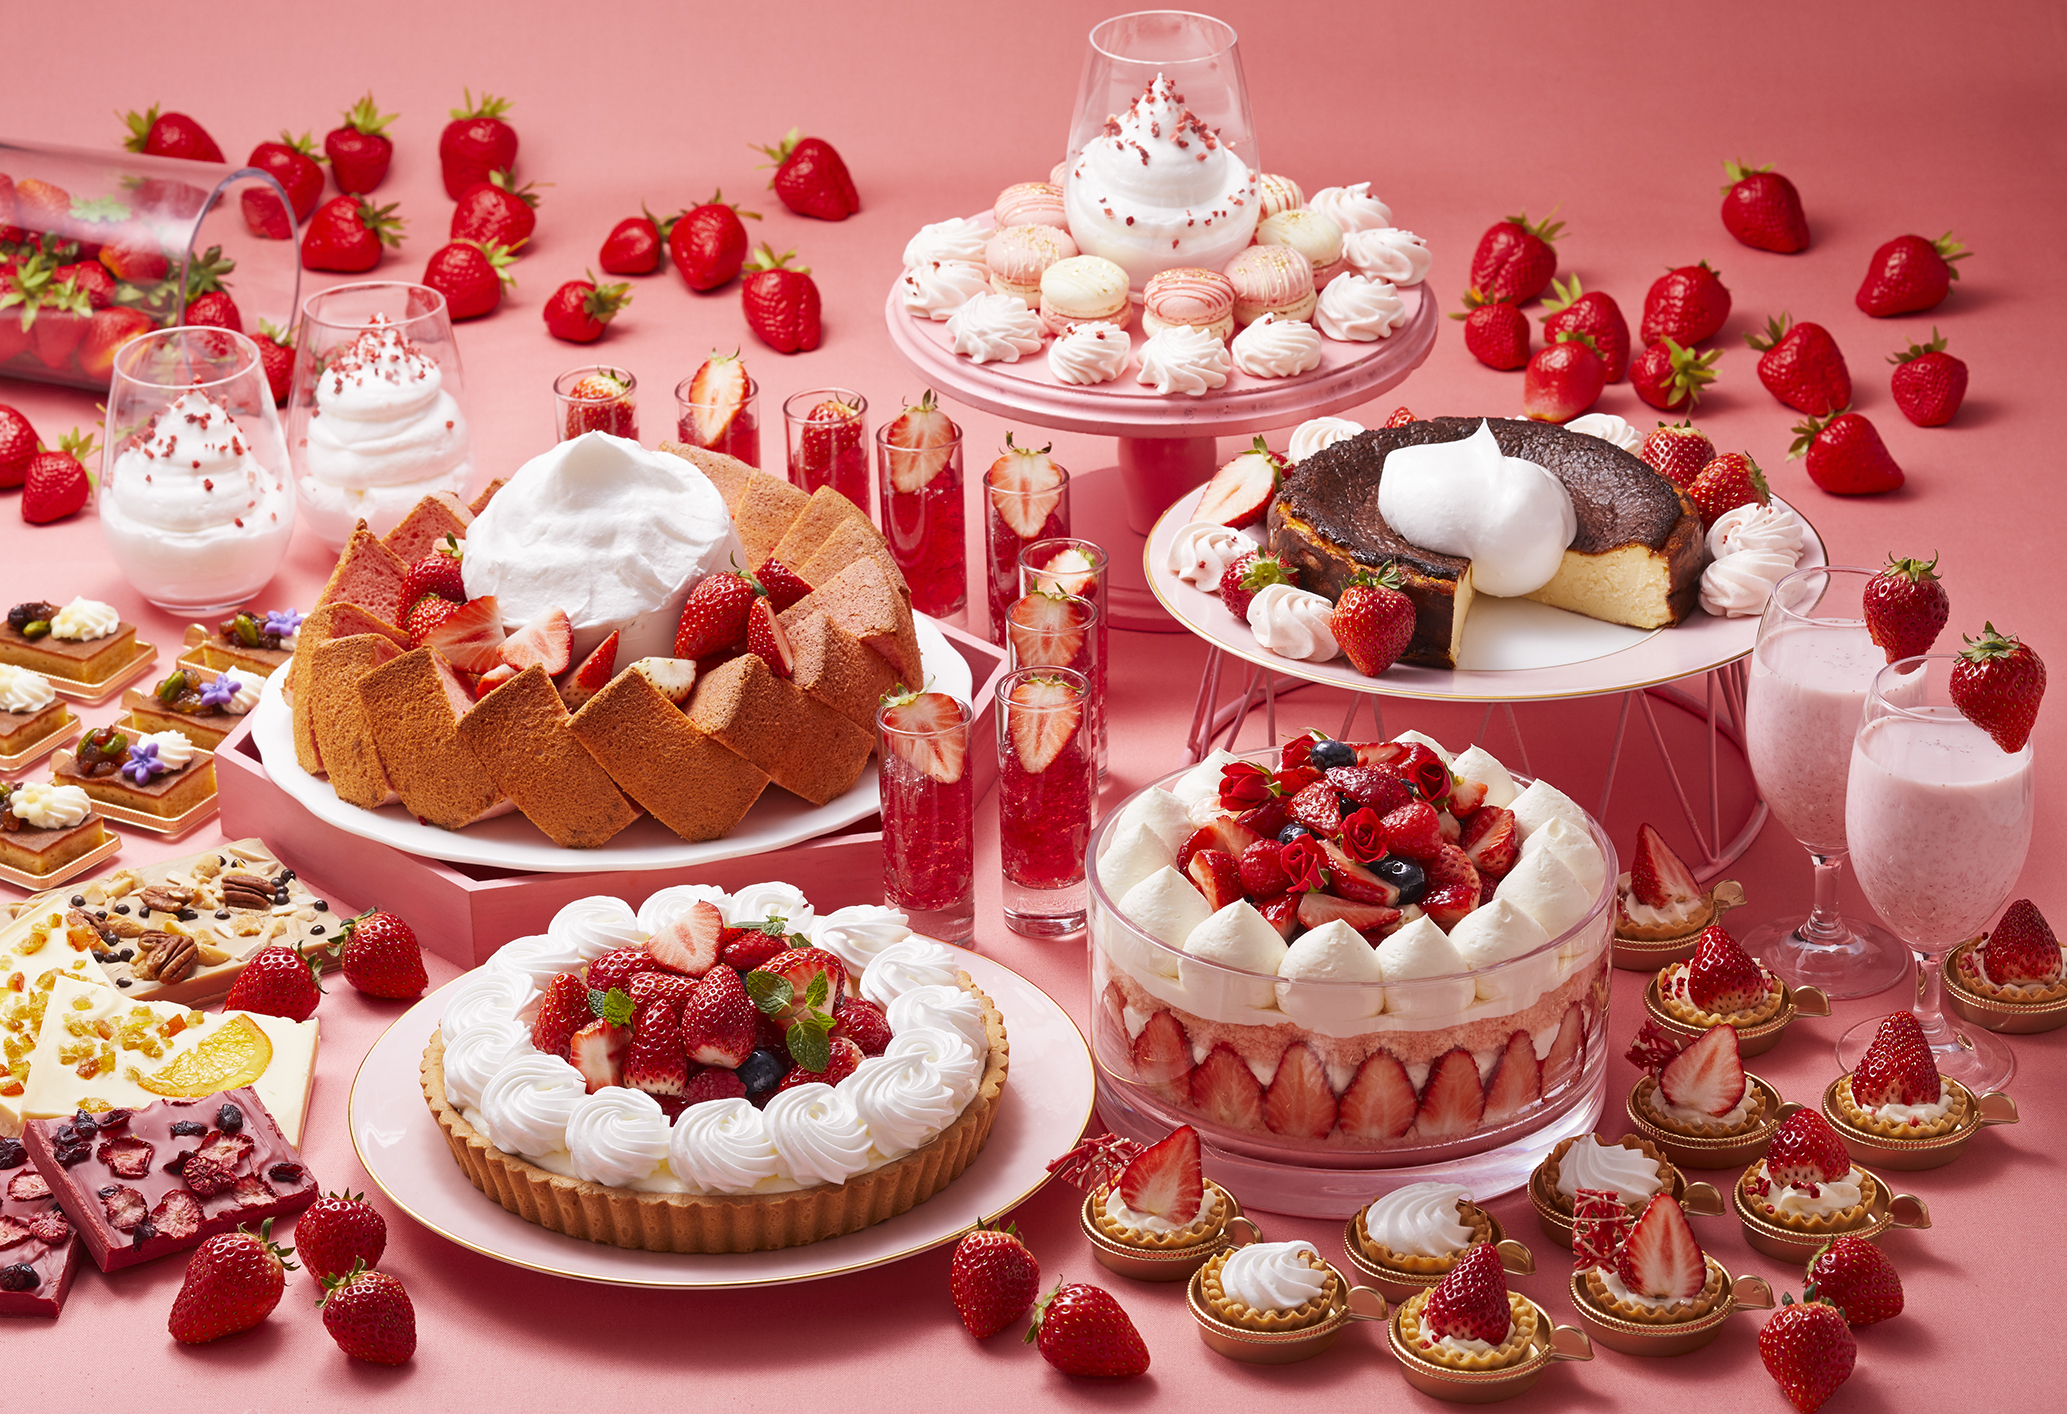 Keio Plaza Hotel Tokyo Offers Strawberry Dessert Buffet Implementing ...